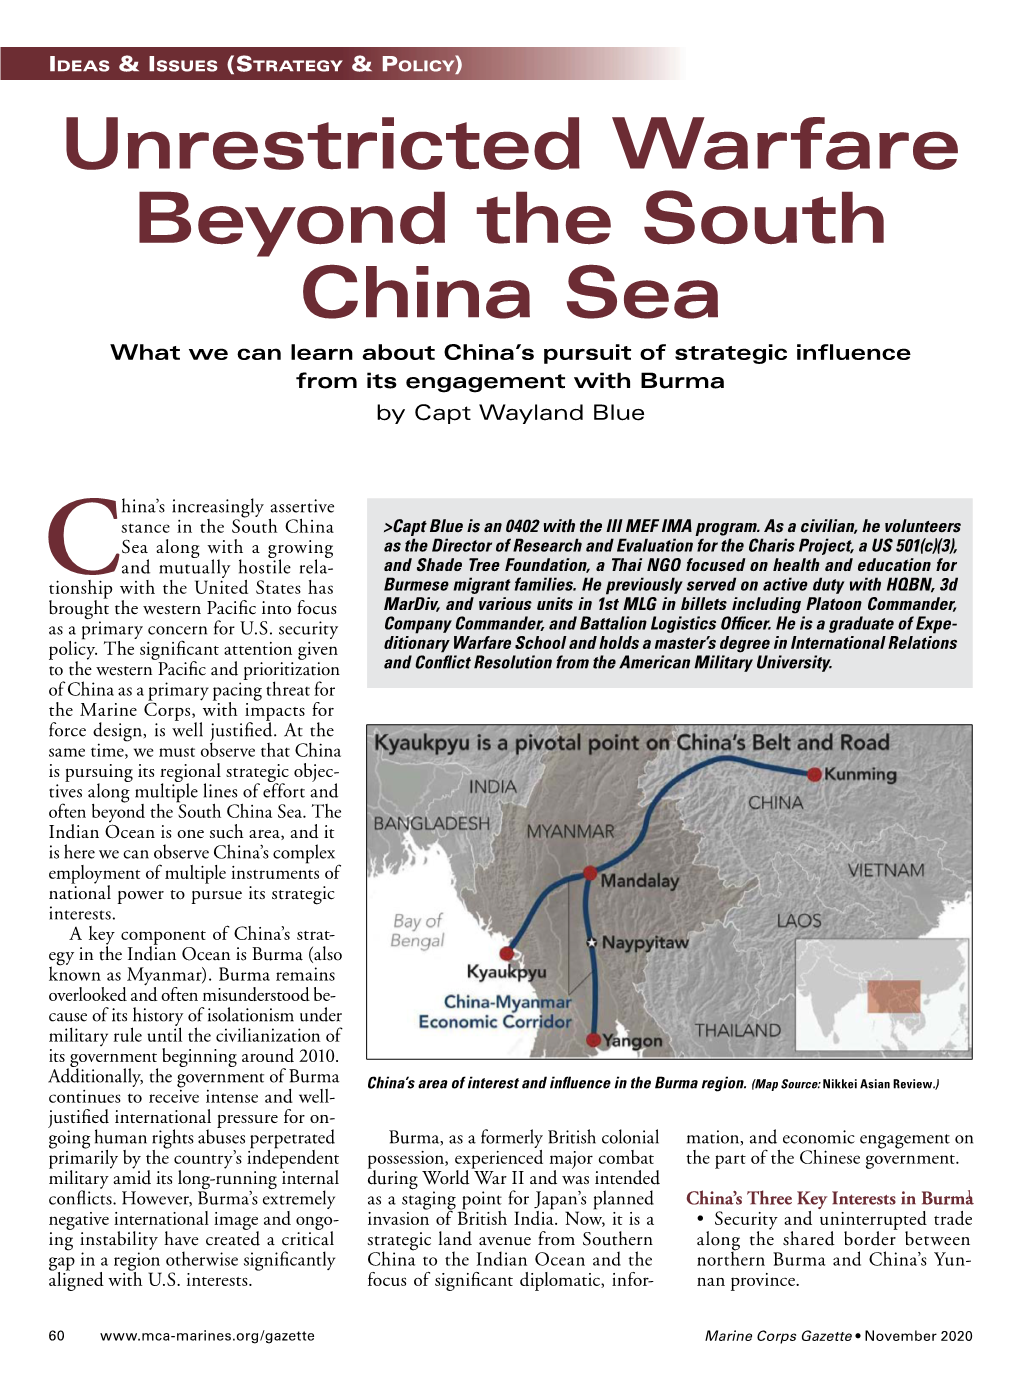 Unrestricted Warfare Beyond the South China Sea What We Can Learn About China’S Pursuit of Strategic Inﬂuence from Its Engagement with Burma by Capt Wayland Blue